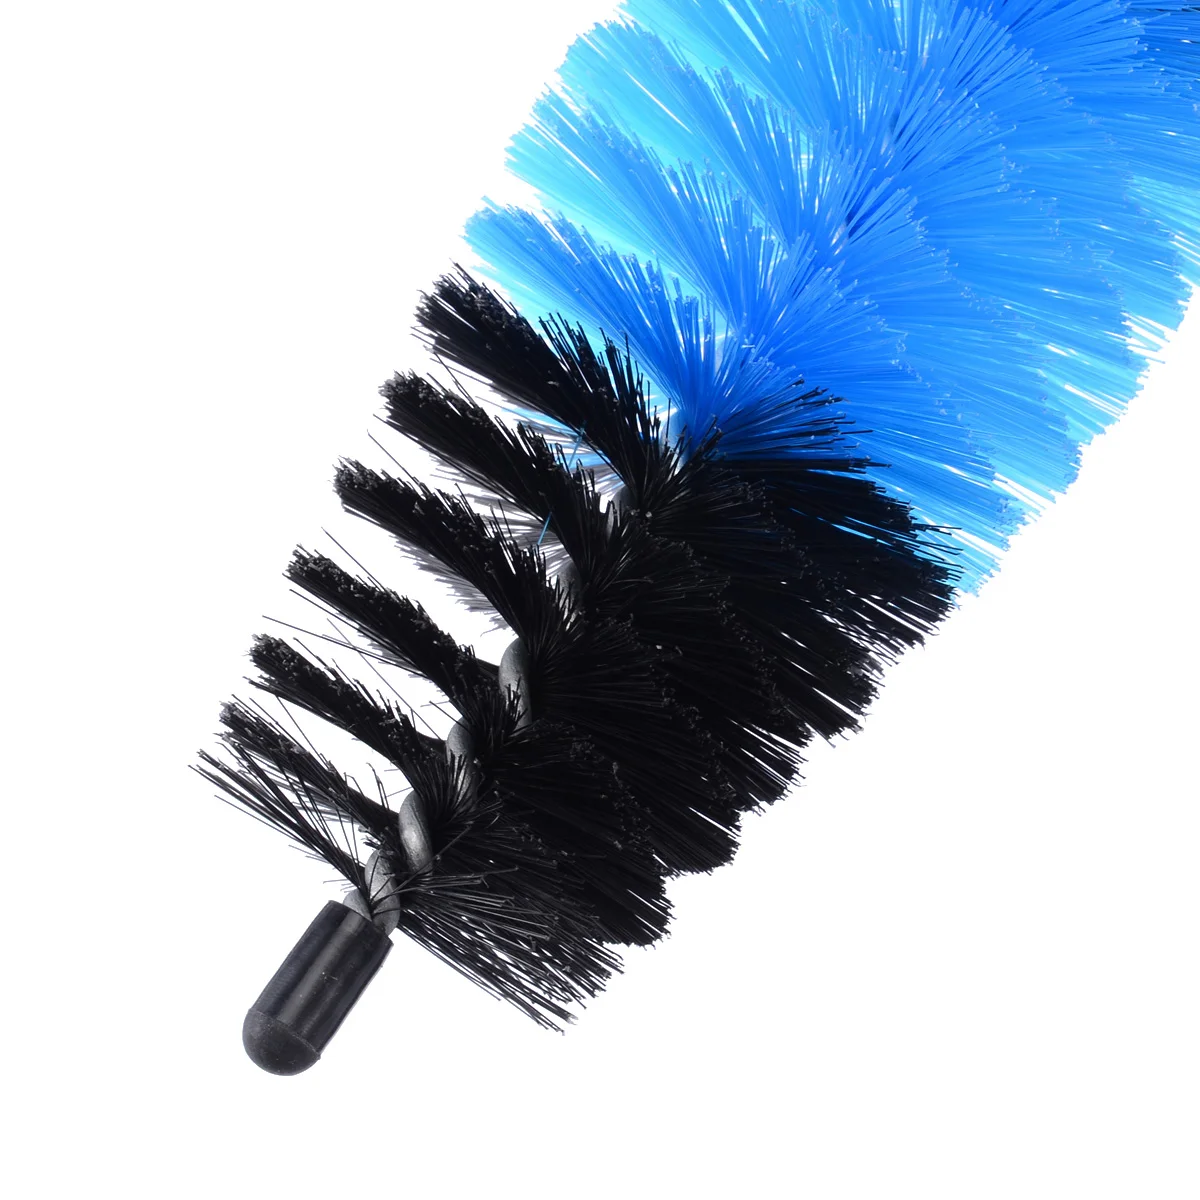 450mm Long Car Grille Wheel Engine Brush Wash Microfiber Cleaning Detailing Automotive Cleaning Tool